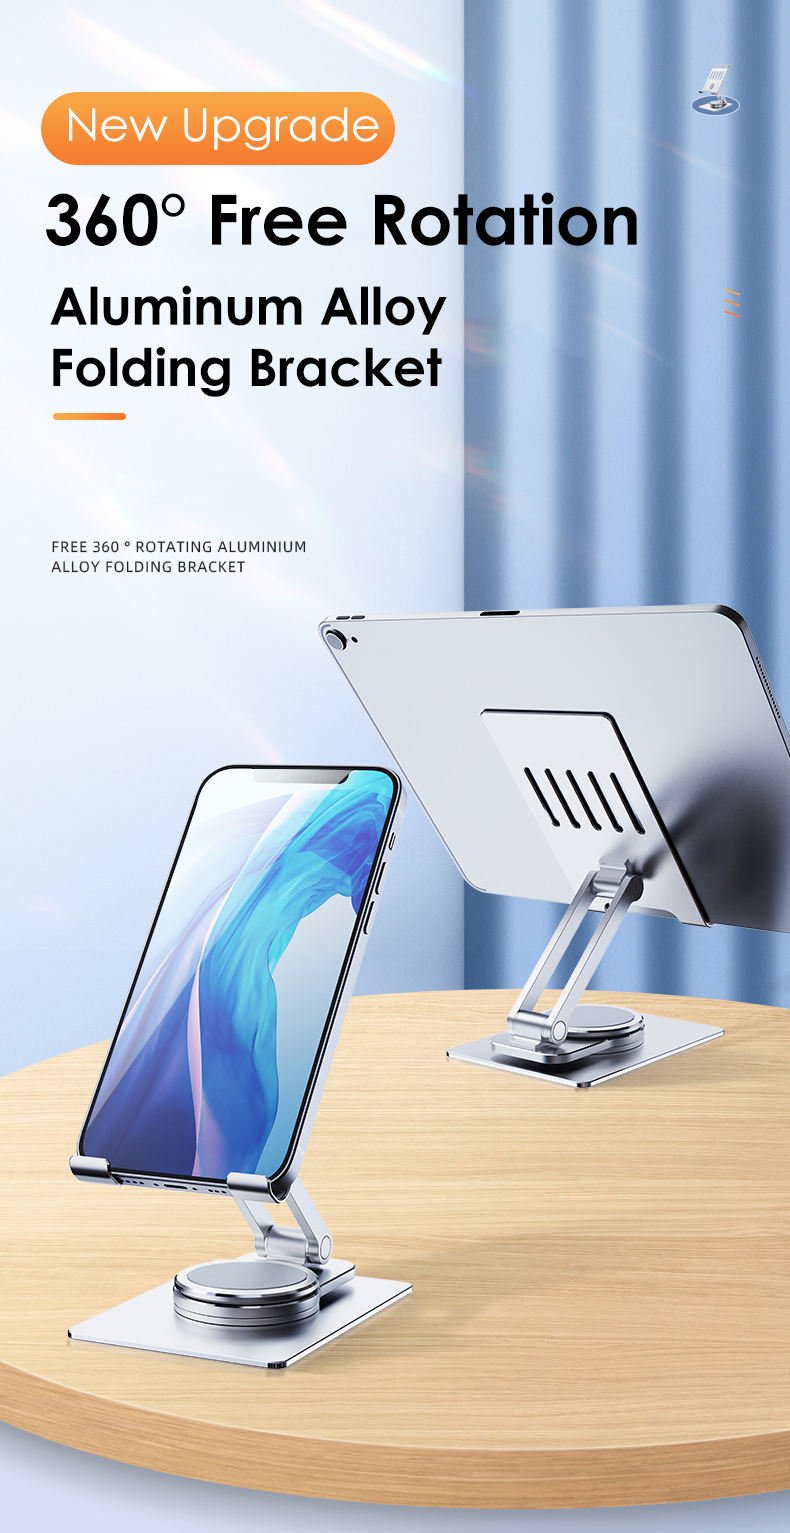 Foldable 360 Rotation Alloy Phone and Tablet Stand